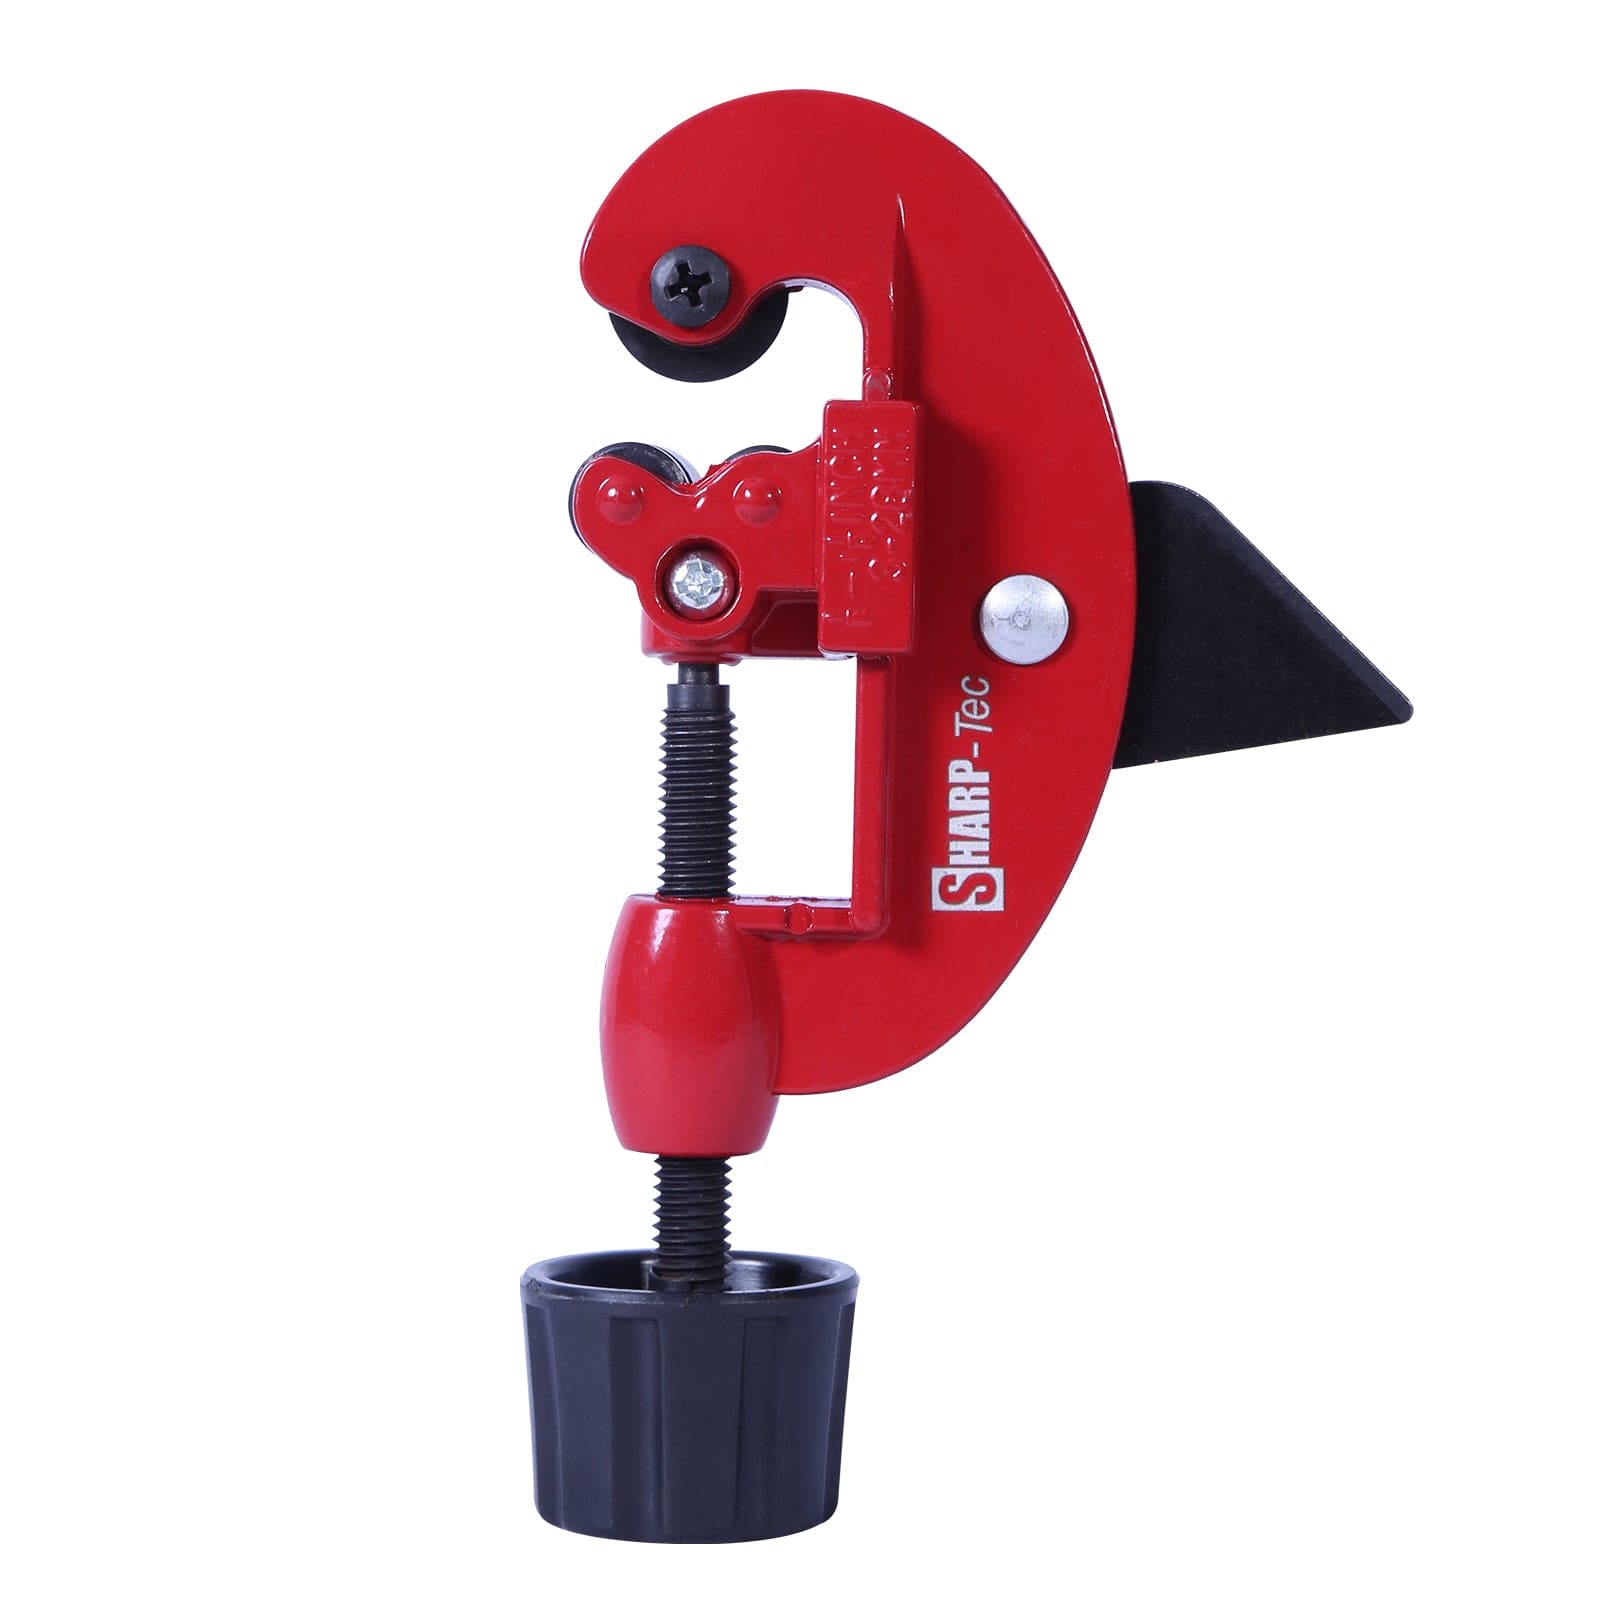 3-28mm G Shaped Pipe Cutter